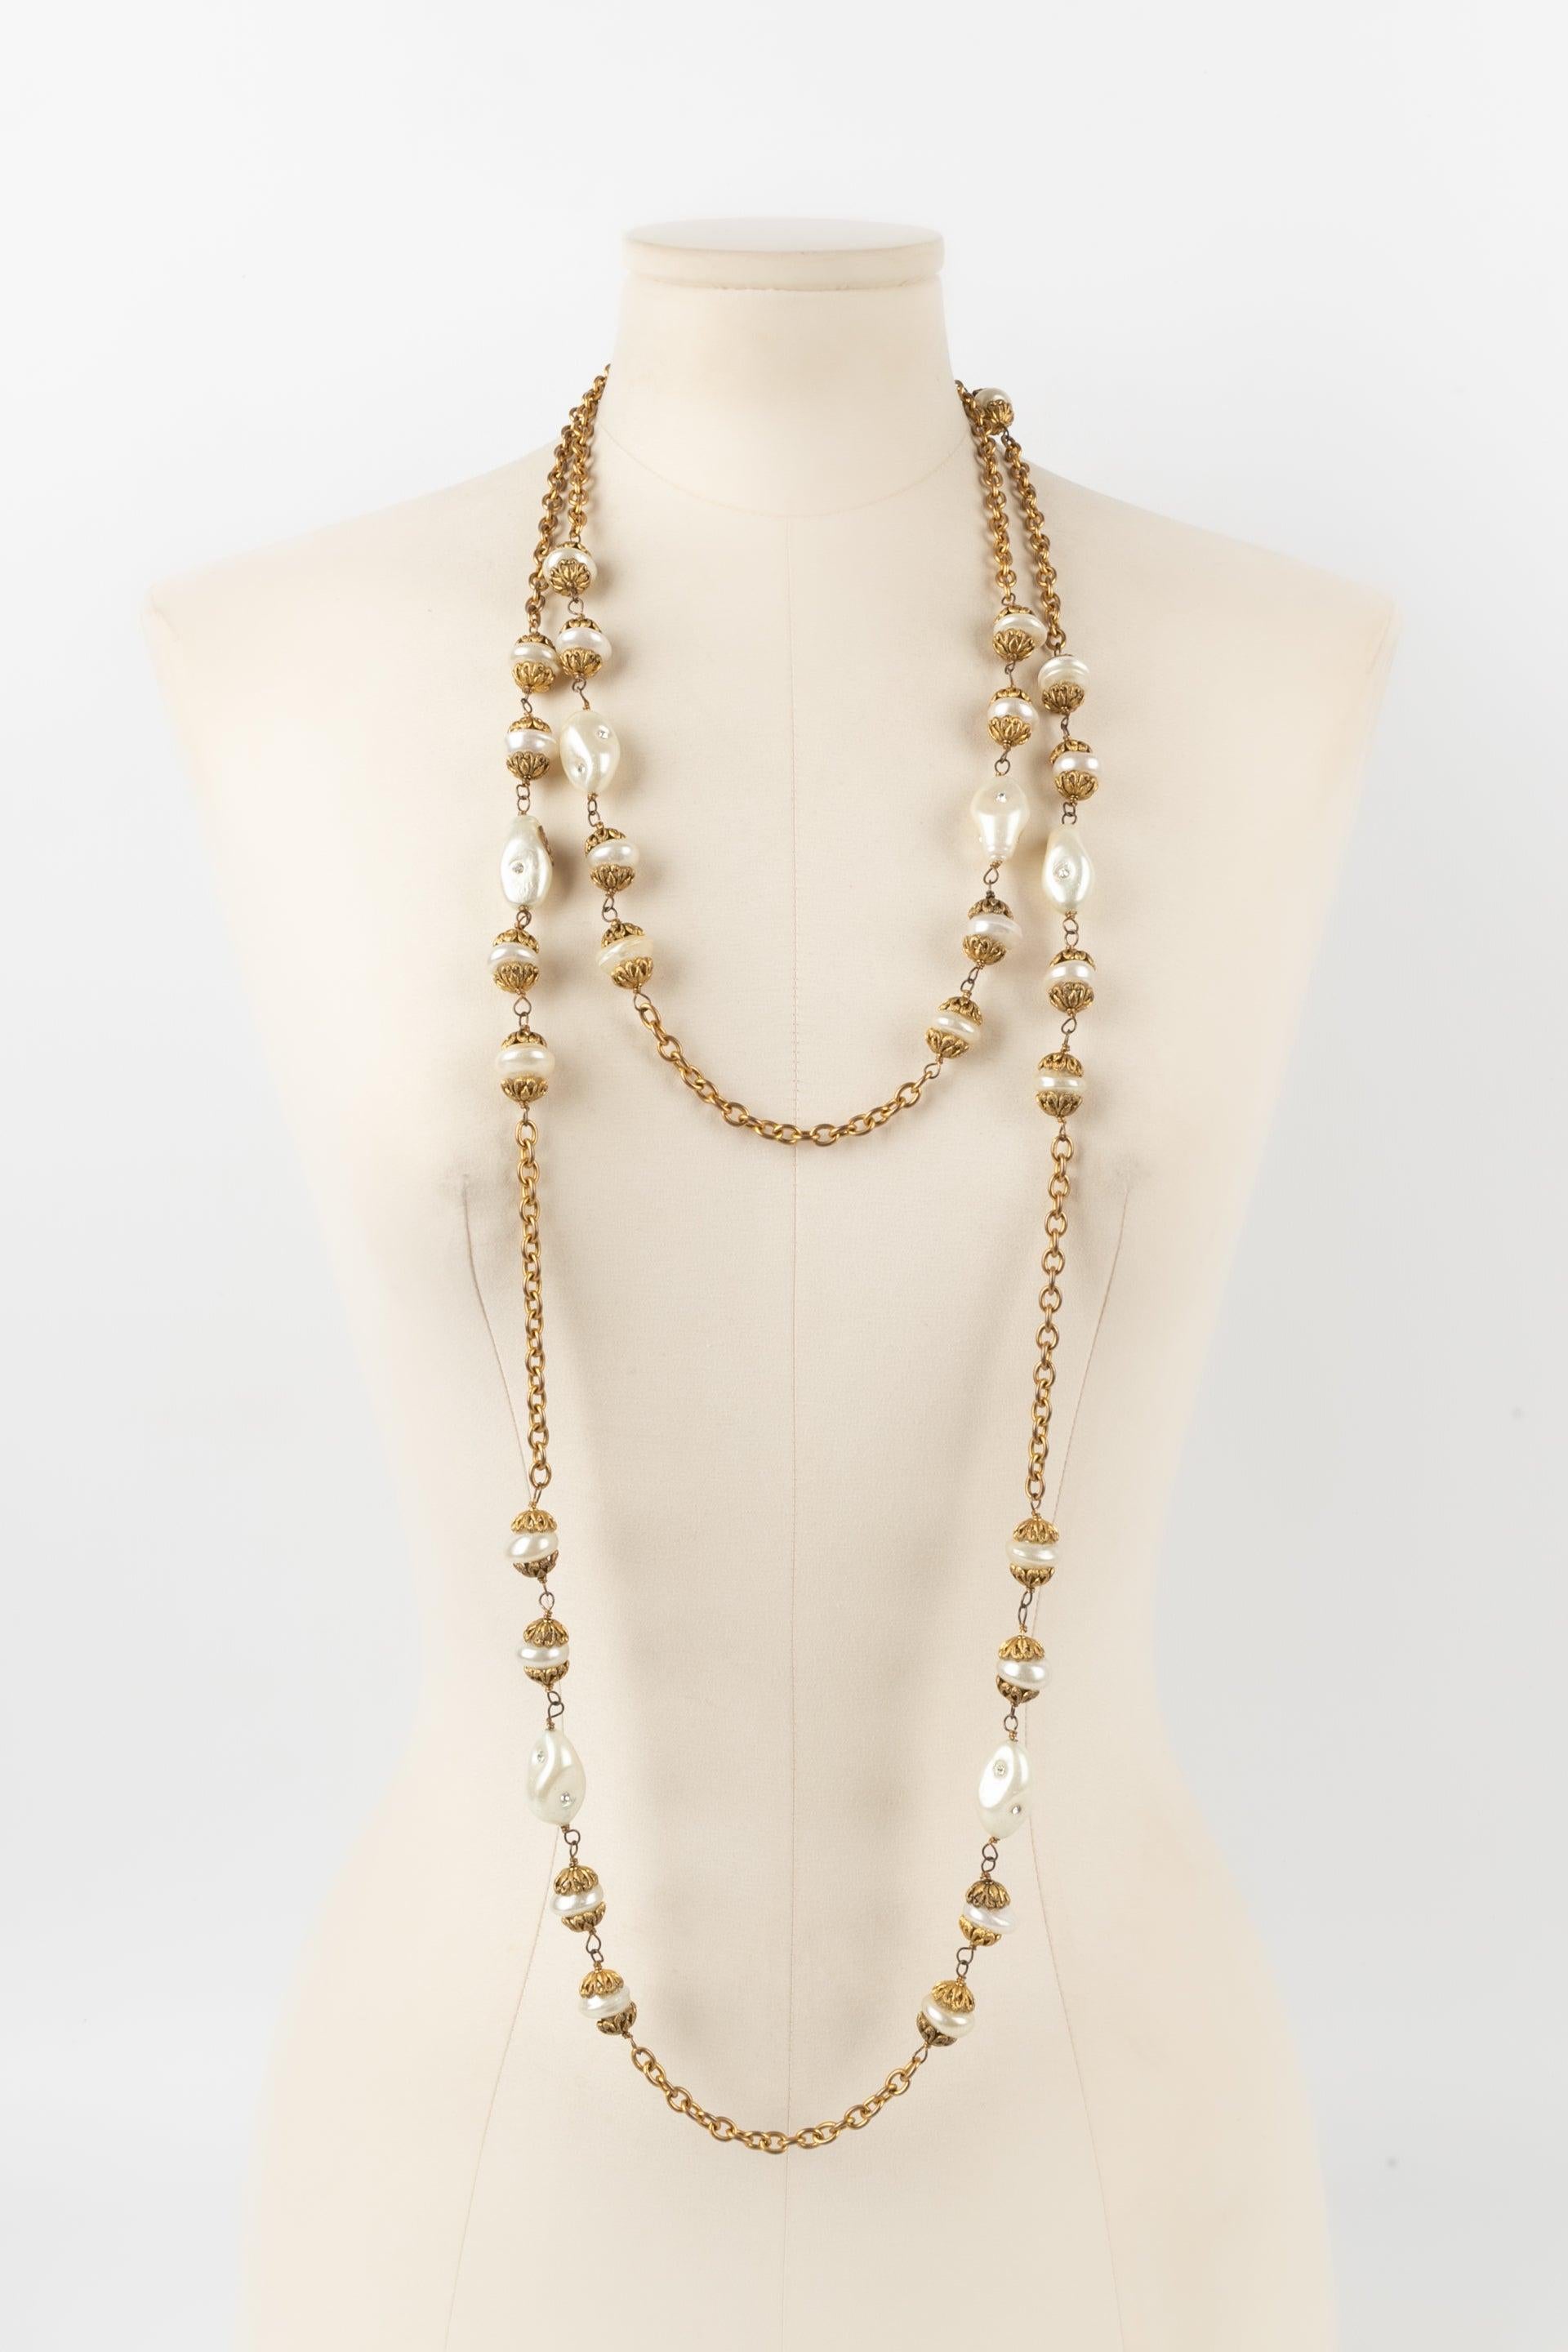 Chanel - (Made in France) Golden metal sautoir with costume pearls and Swarovski rhinestones. 1984 Collection.

Additional information:
Condition: Very good condition
Dimensions: Length: 186 cm

Seller Reference: CB230